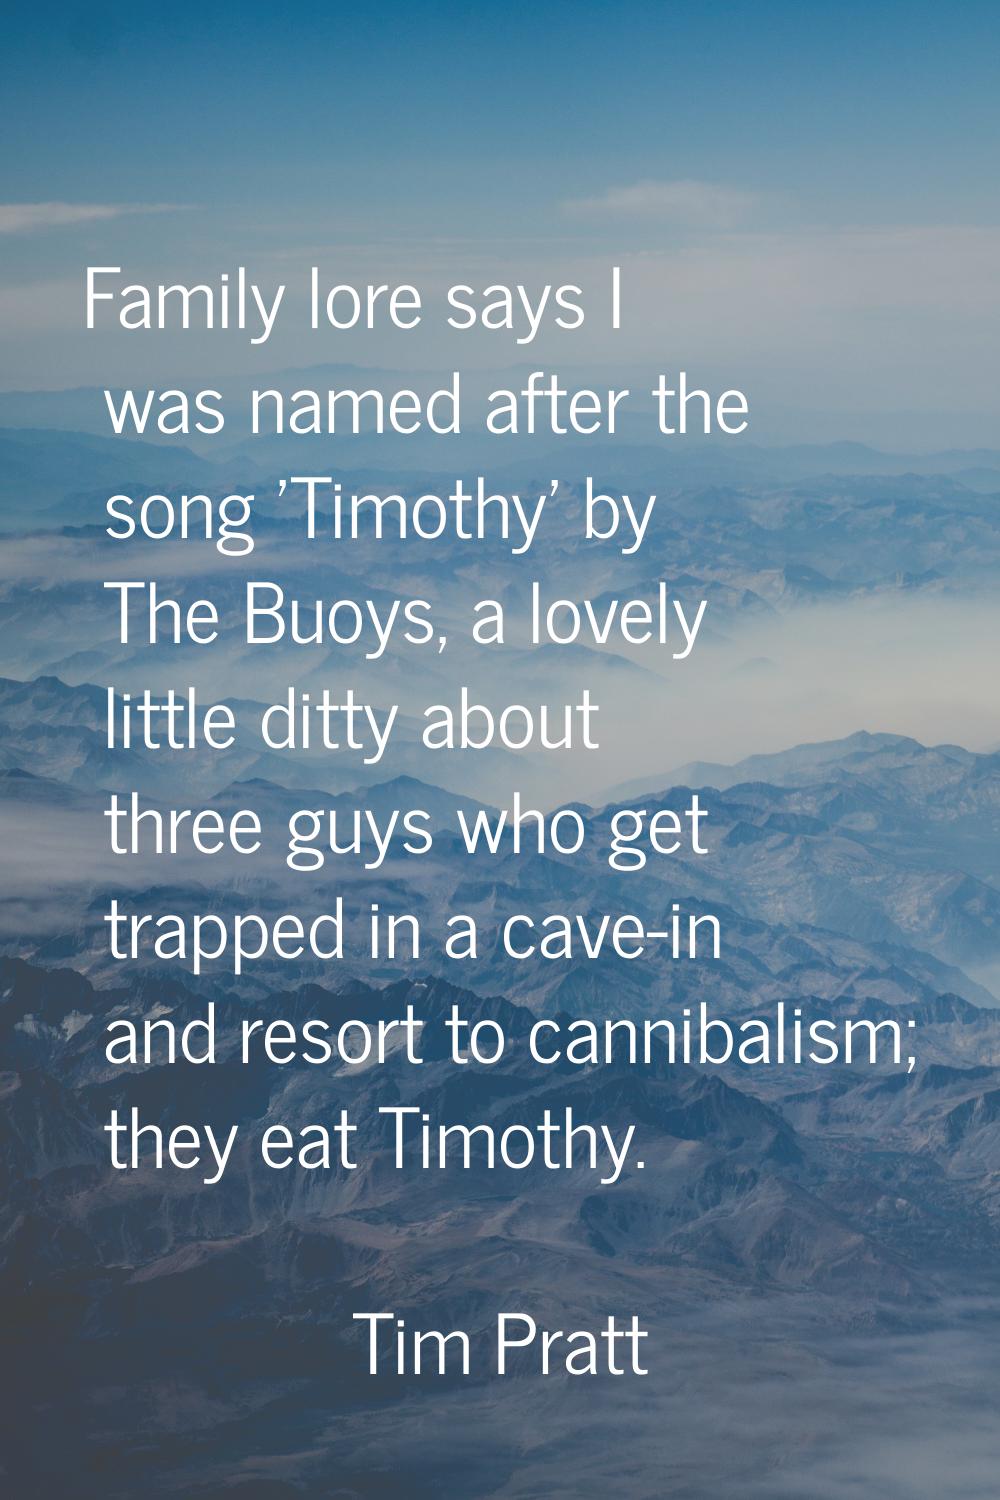 Family lore says I was named after the song 'Timothy' by The Buoys, a lovely little ditty about thr